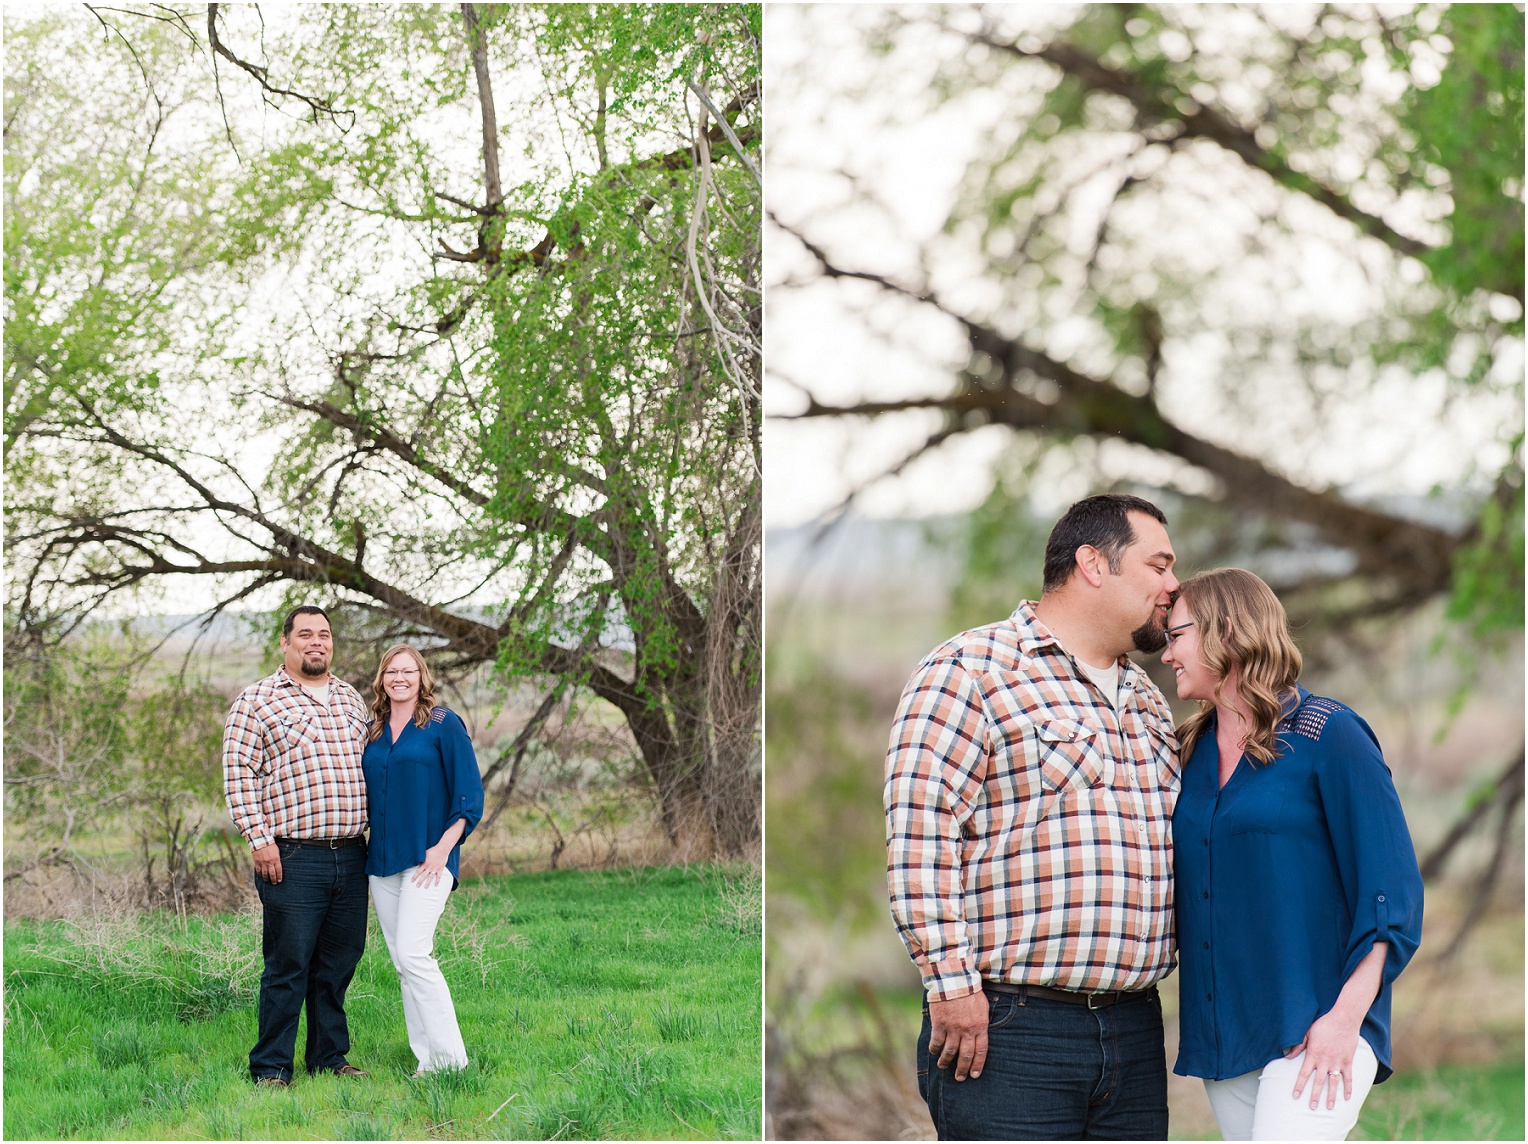 Vantage Crags Engagement Session Couple standing in front of trees